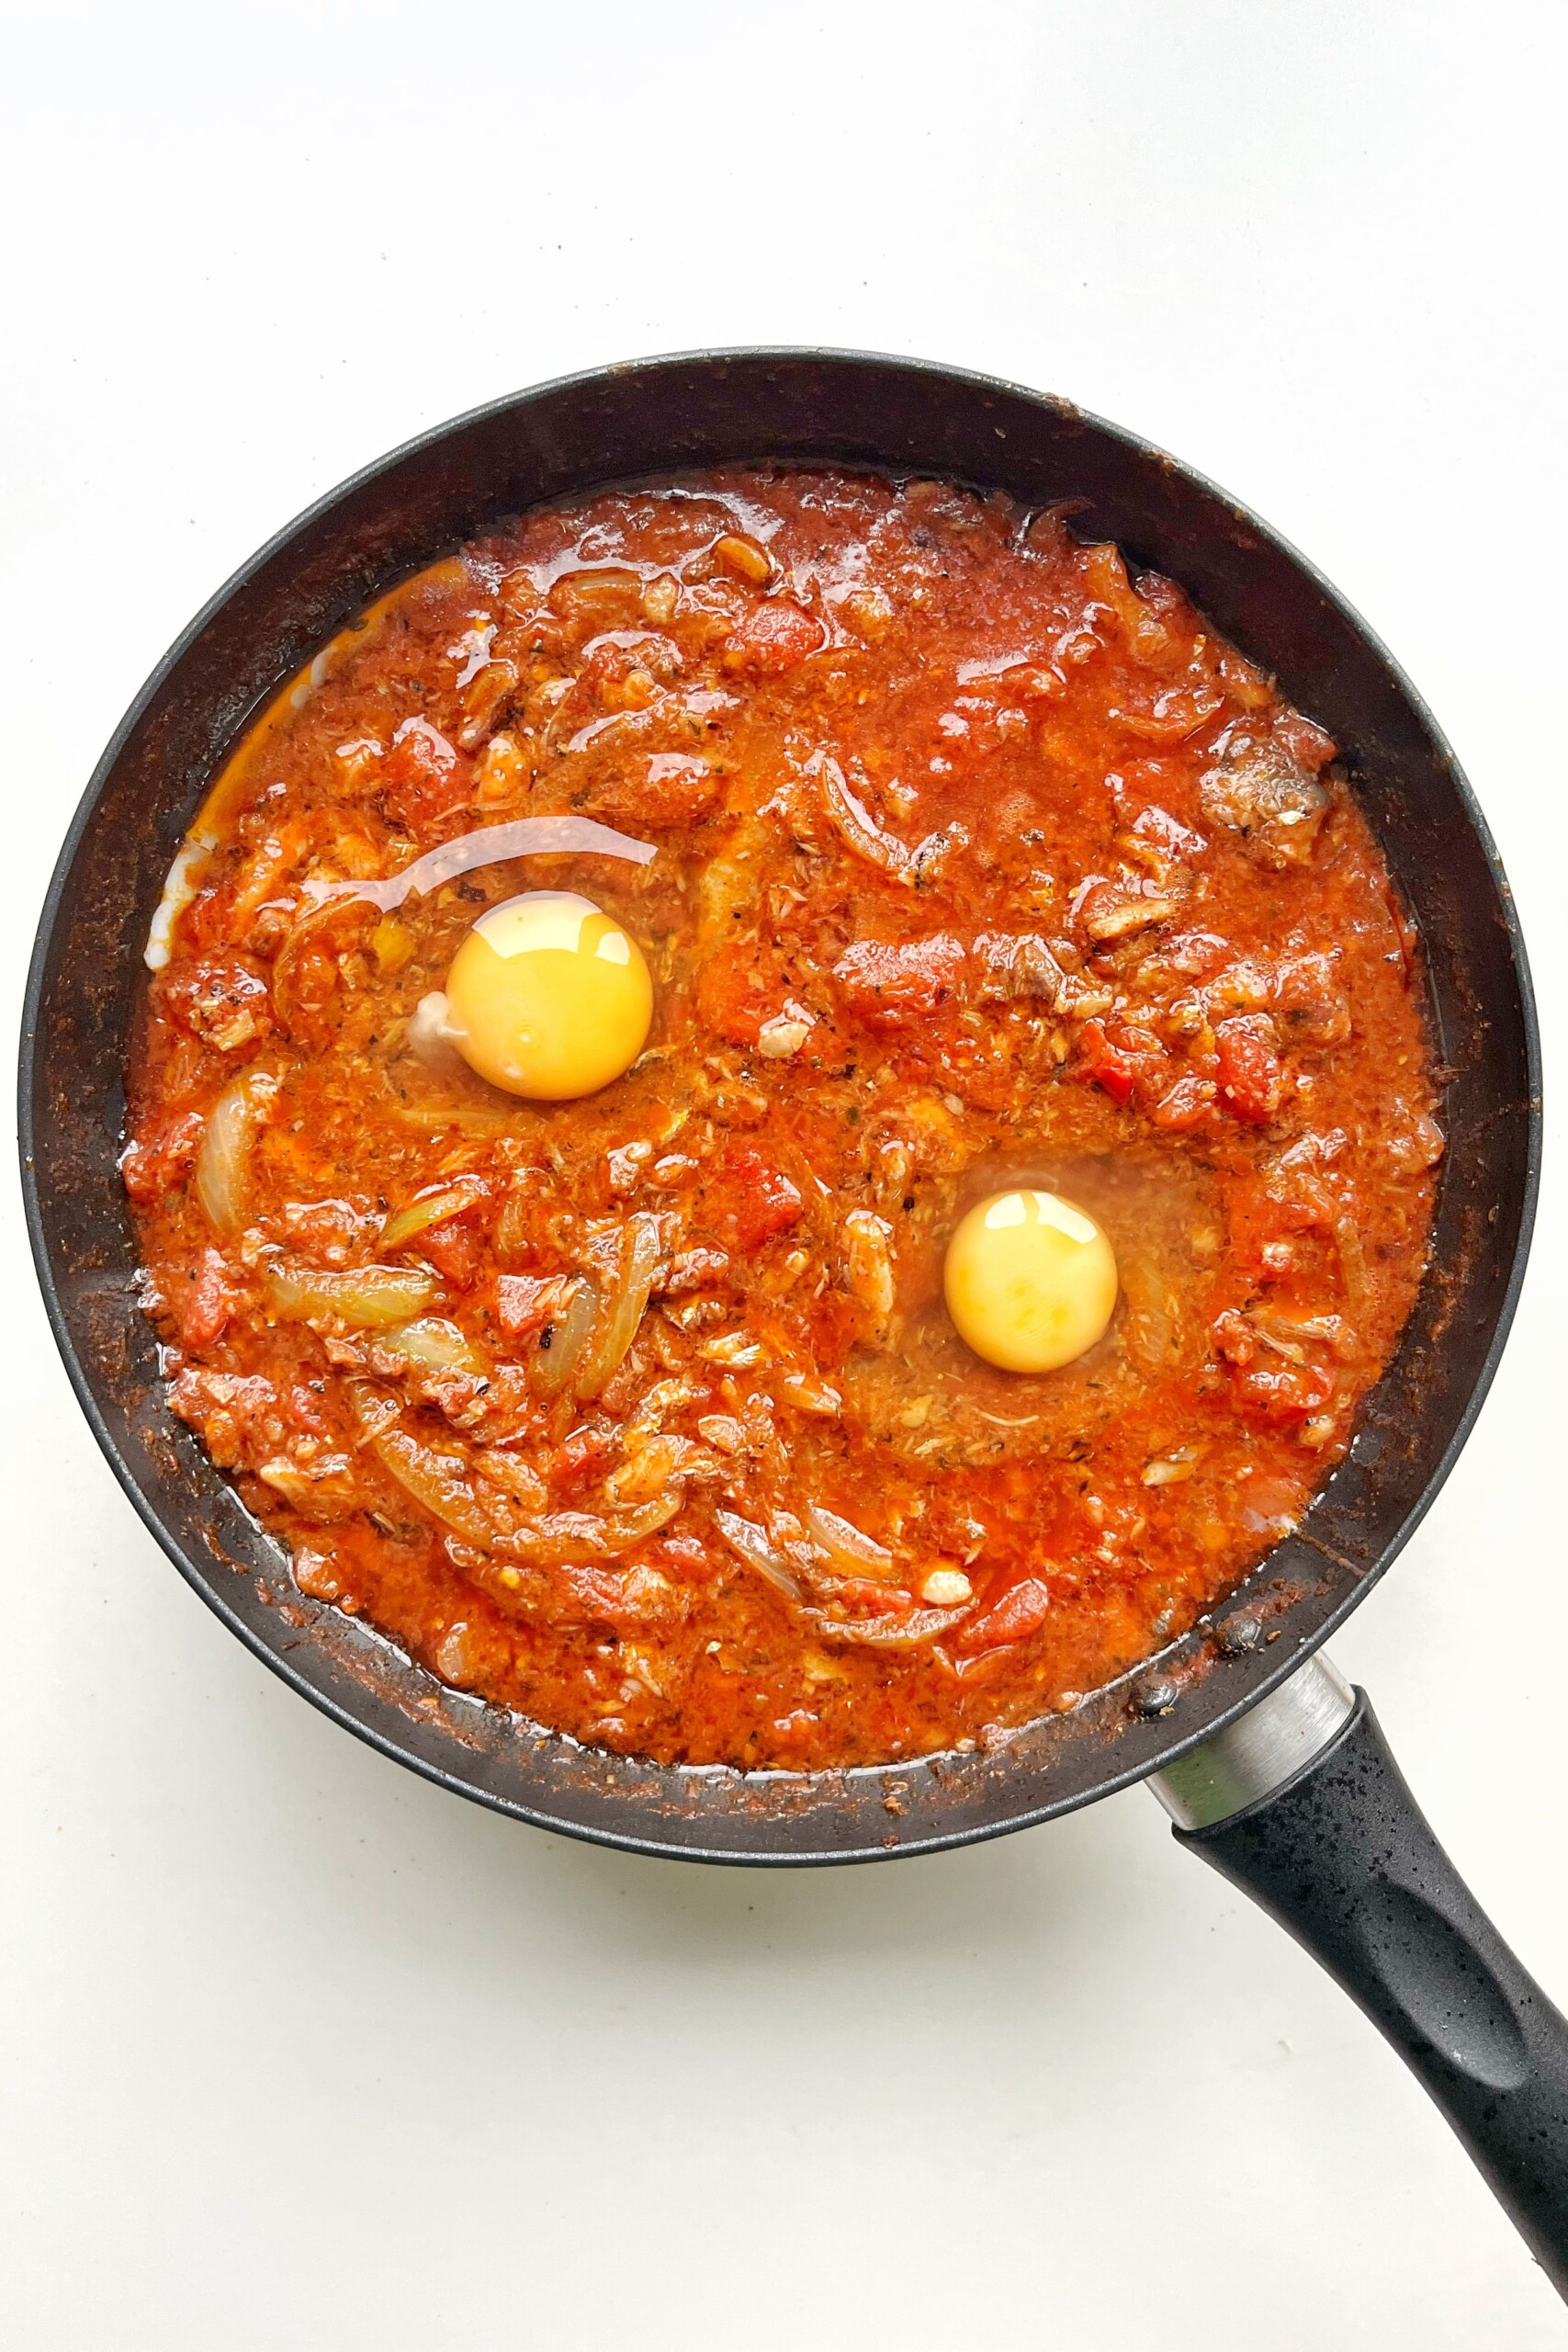 Black pan with tomato and sardine sauce with two eggs cracked into the middle.